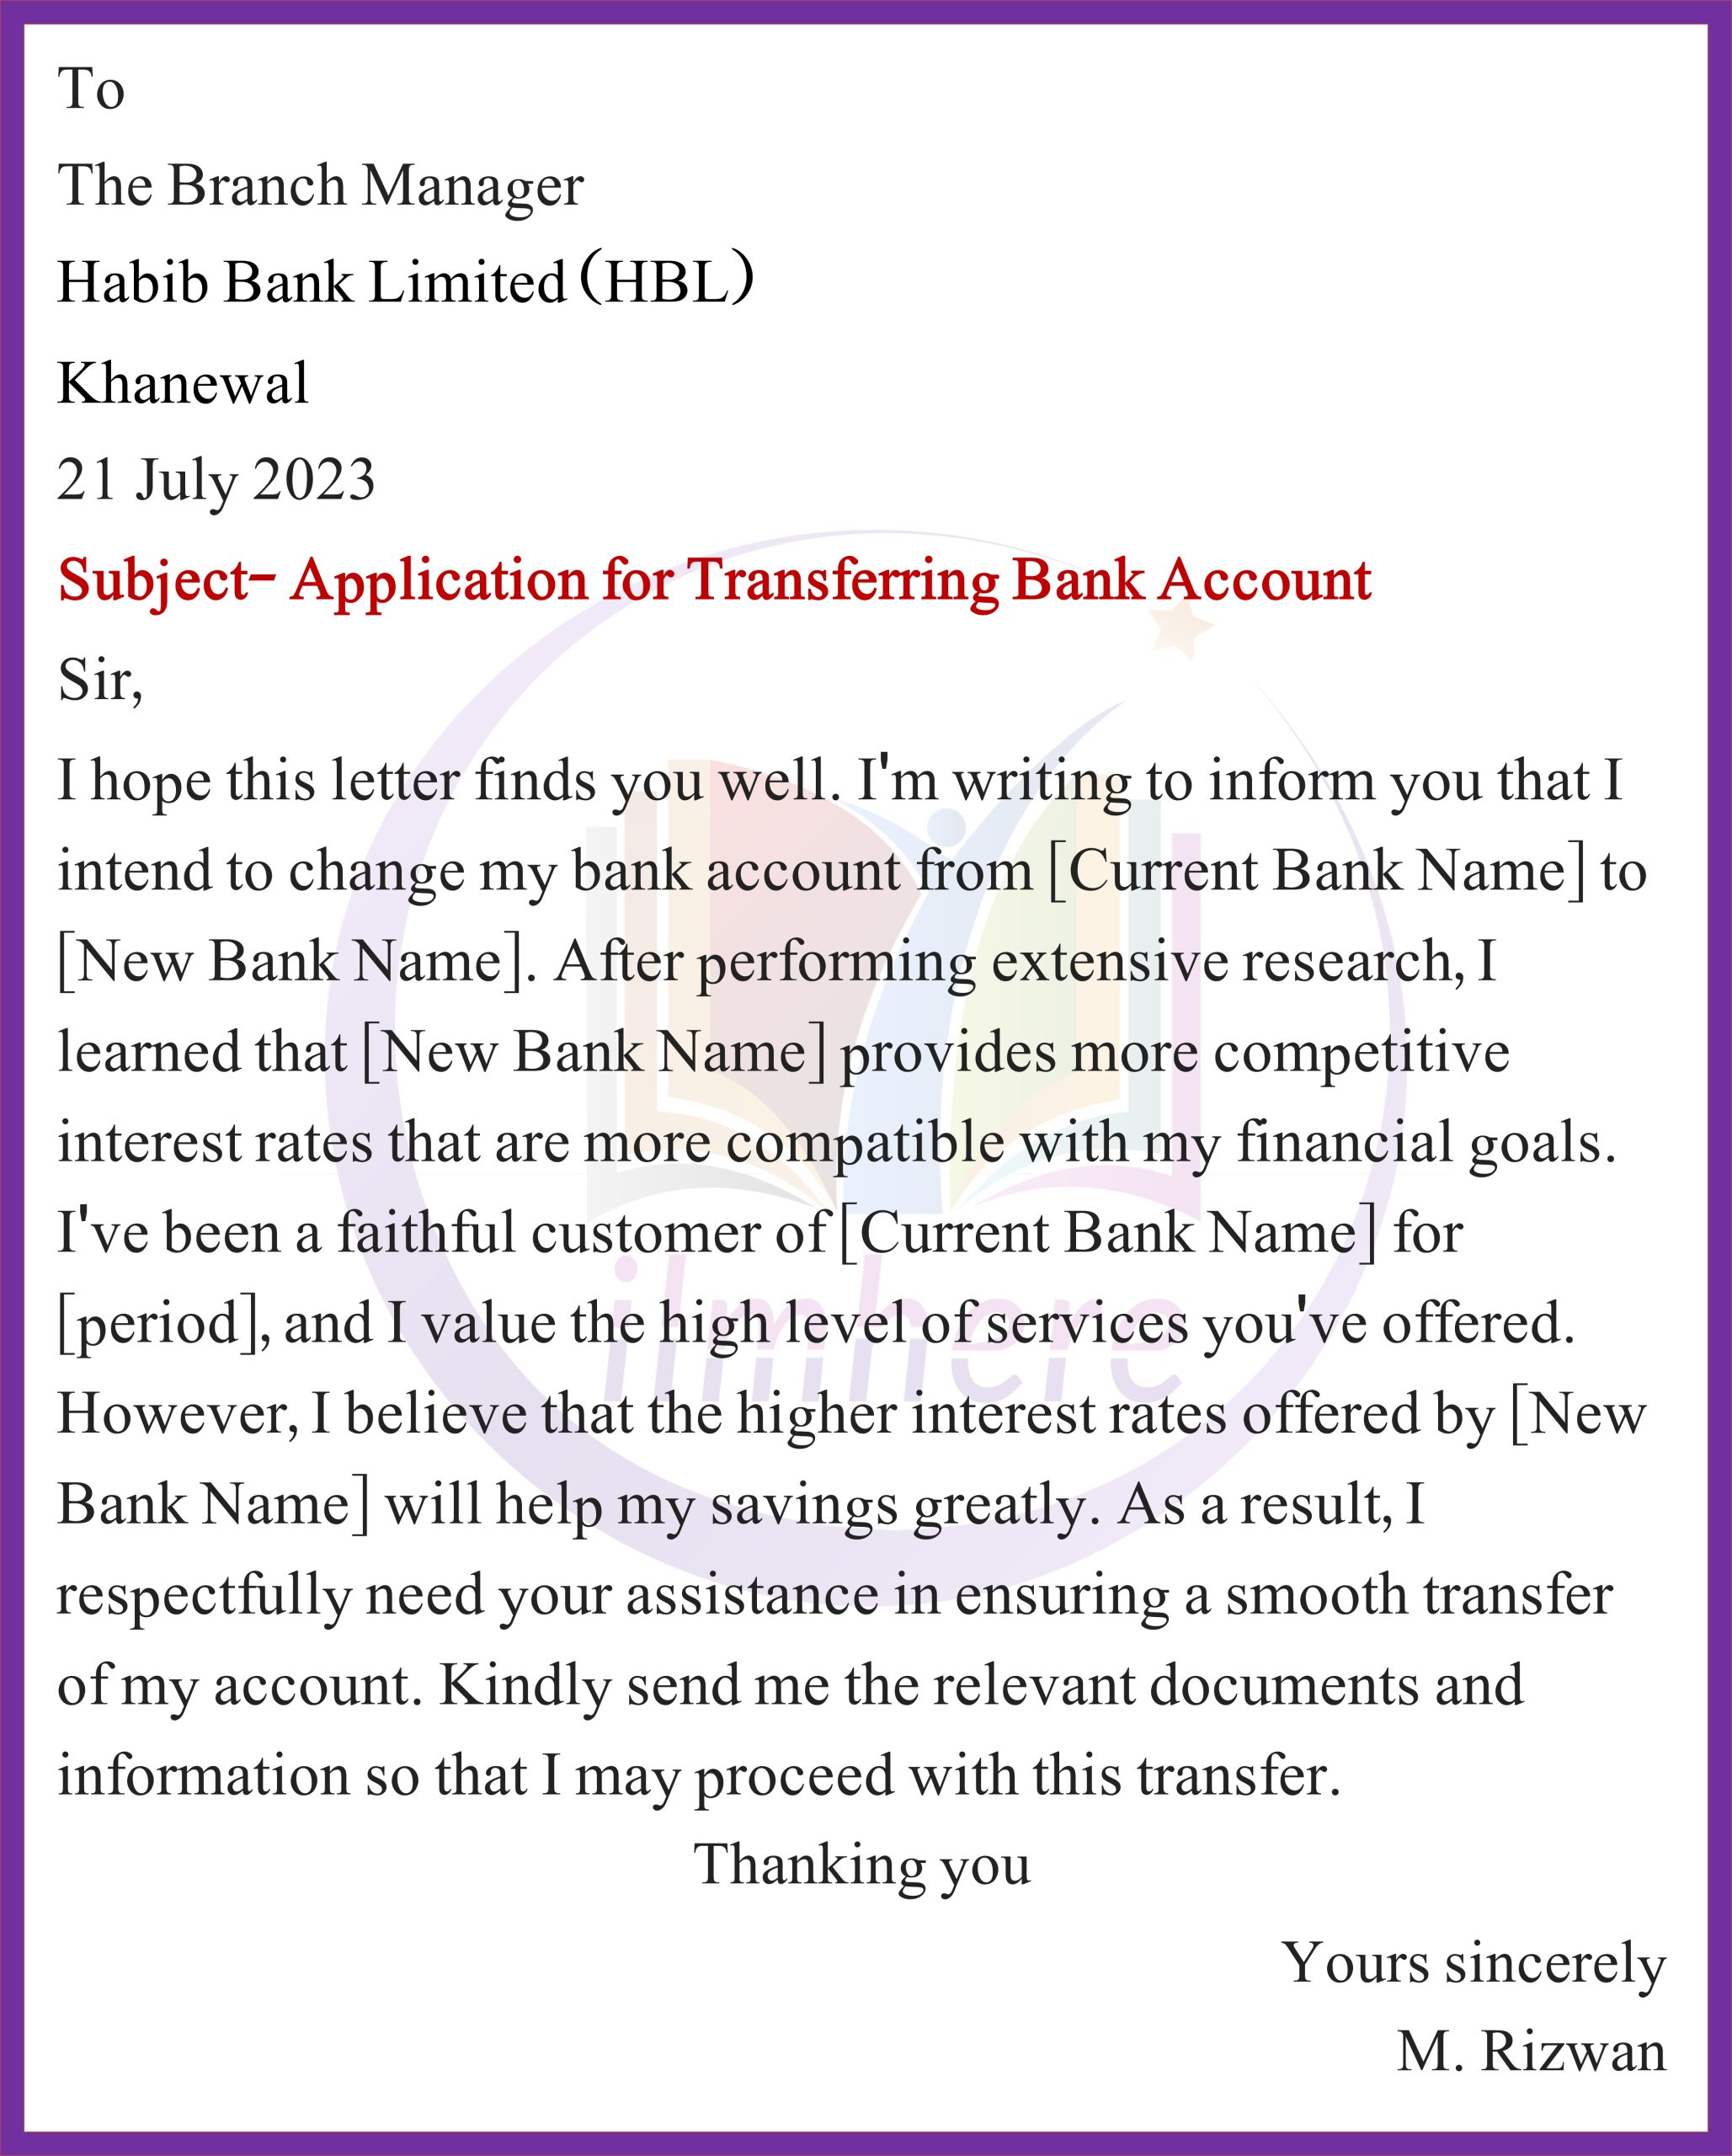 Bank Account Transfer Application For HBL